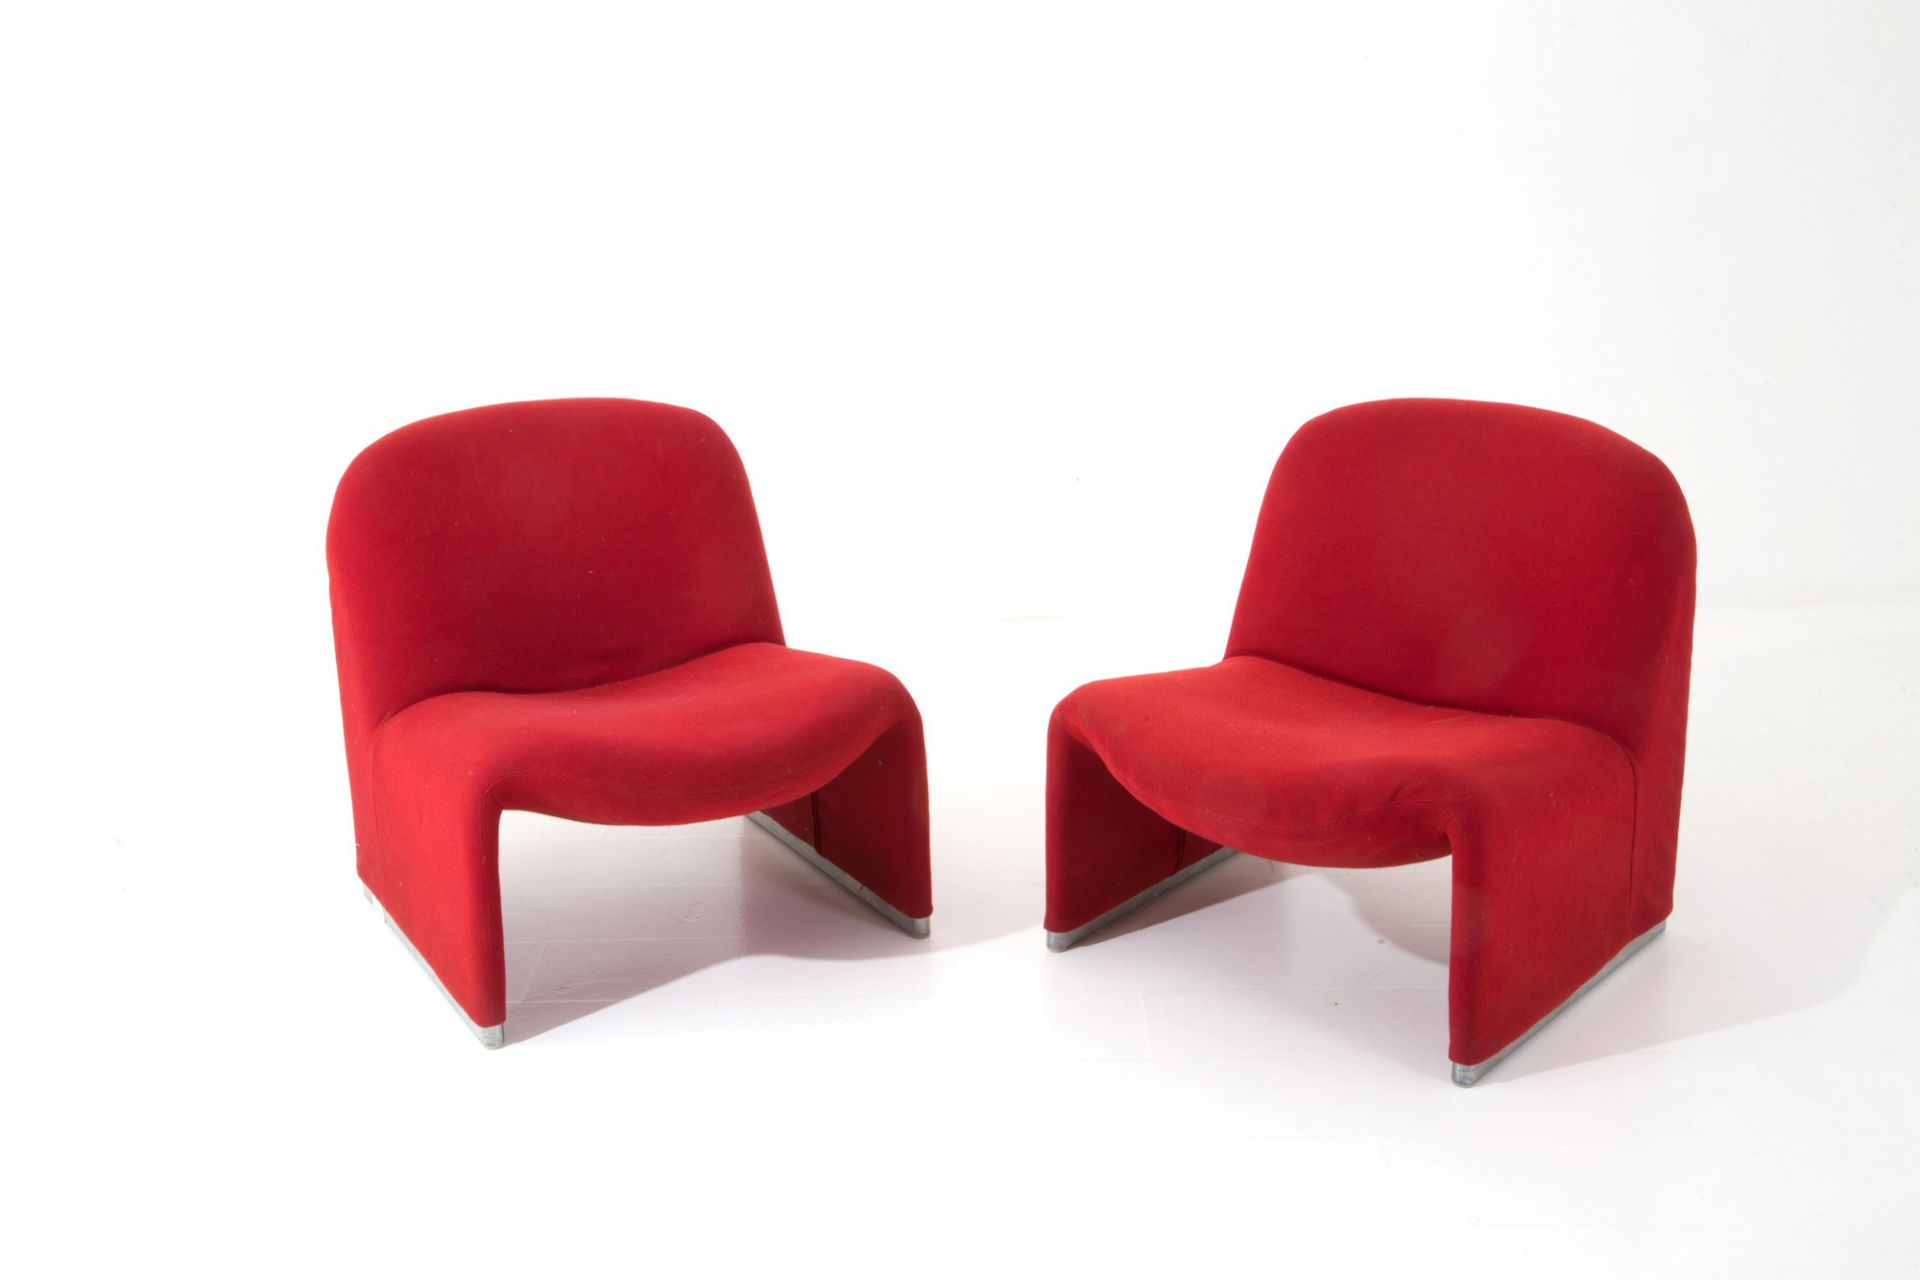 GIANCARLO PIRETTI. Pair of Alky armchairs for ANONIMA CASTELLI - Image 2 of 4